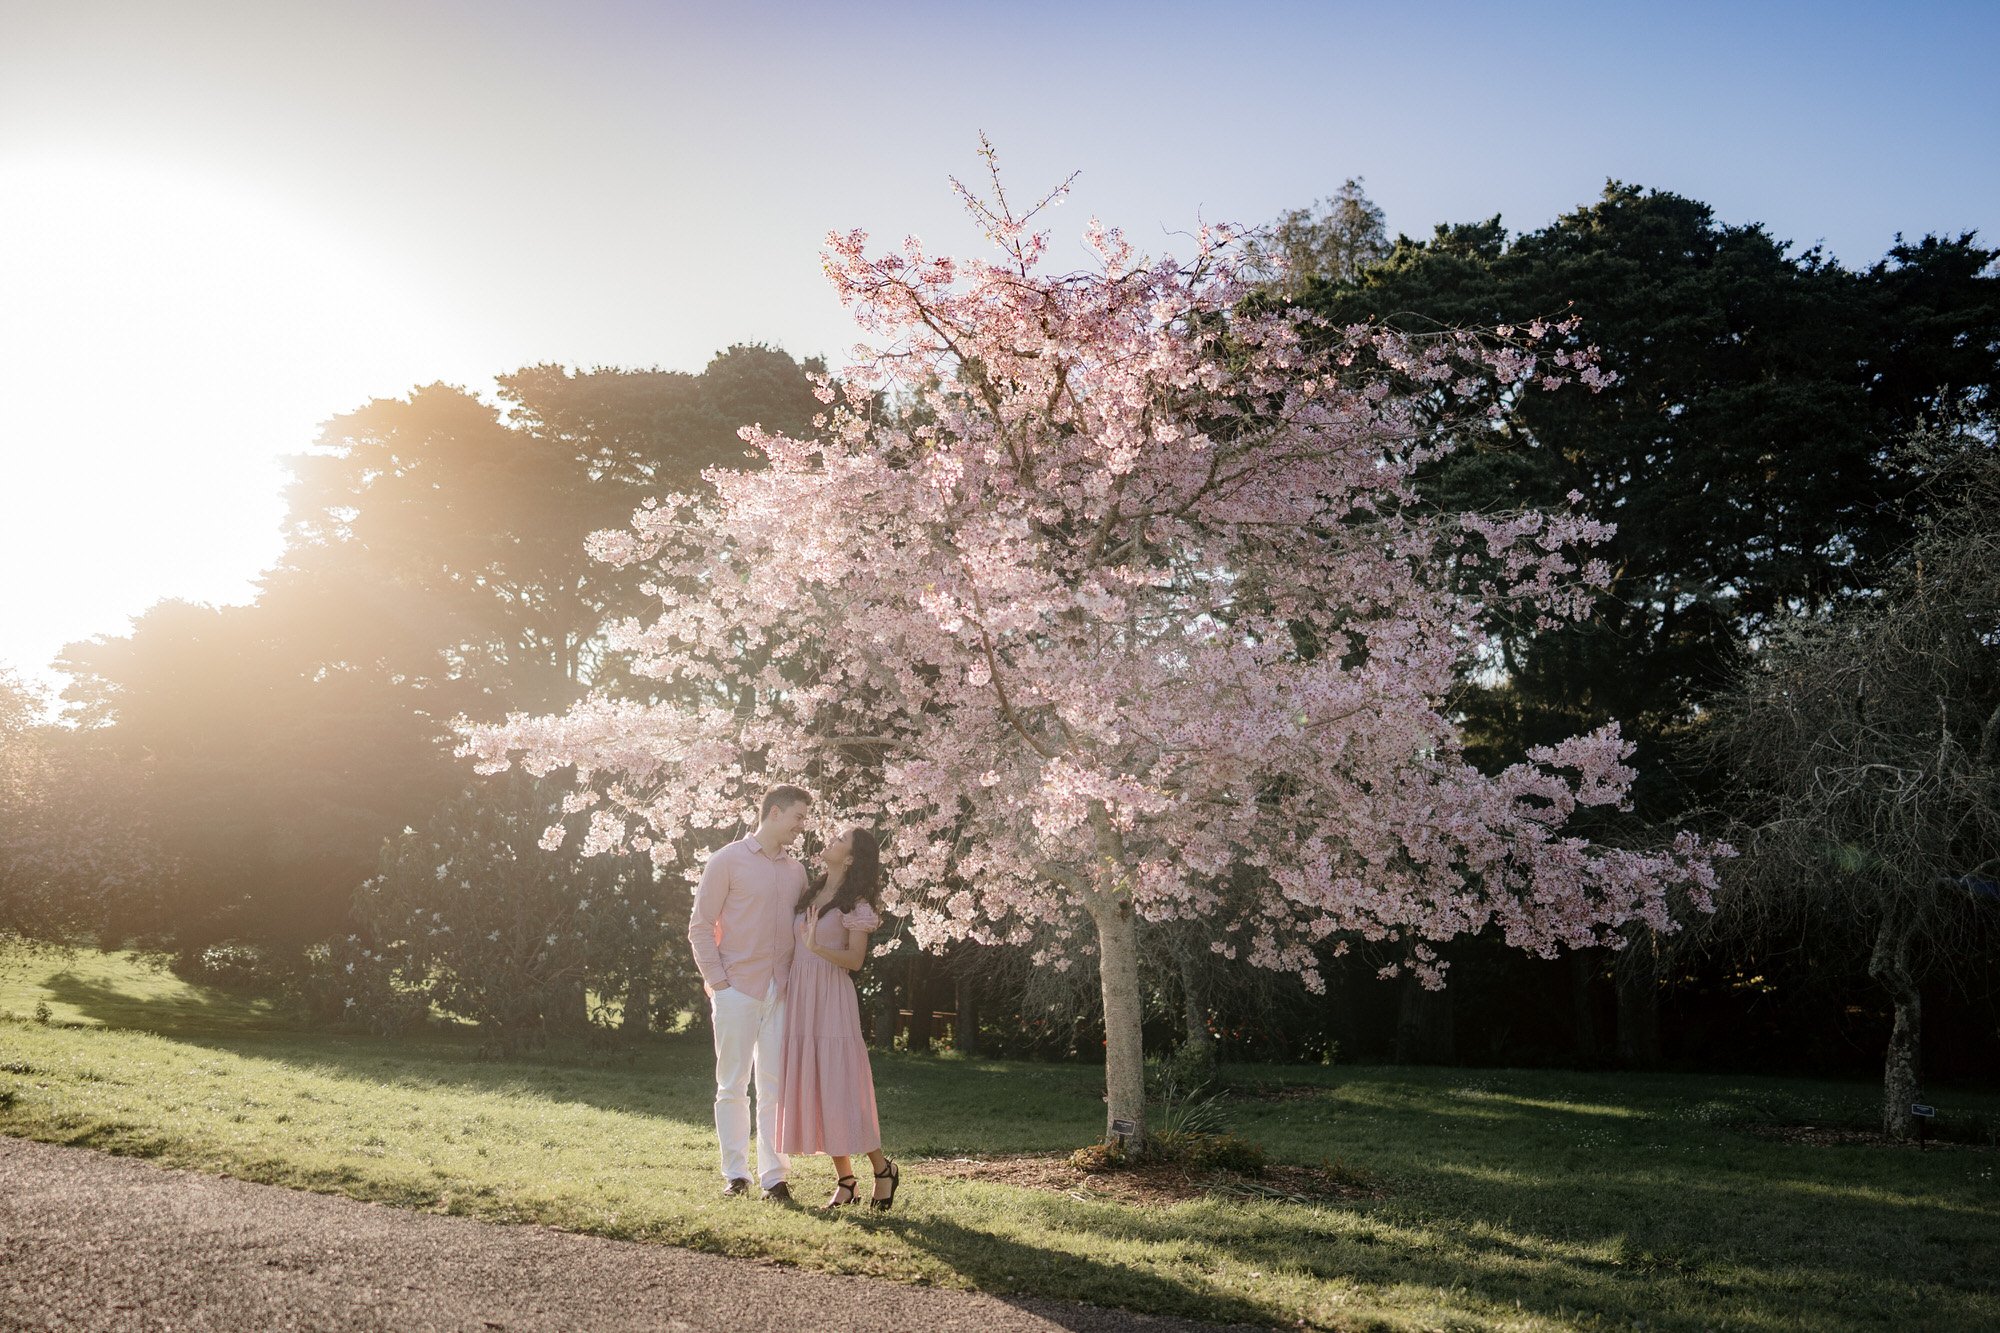 nate-and-thea-singers-duo-2023-top-auckland-wedding-phtographer-photography-videography-film-new-zealand-NZ-best-band-cherry-blossom-botanical-garden-engagement-elopement-dear-white-productions (36).jpg